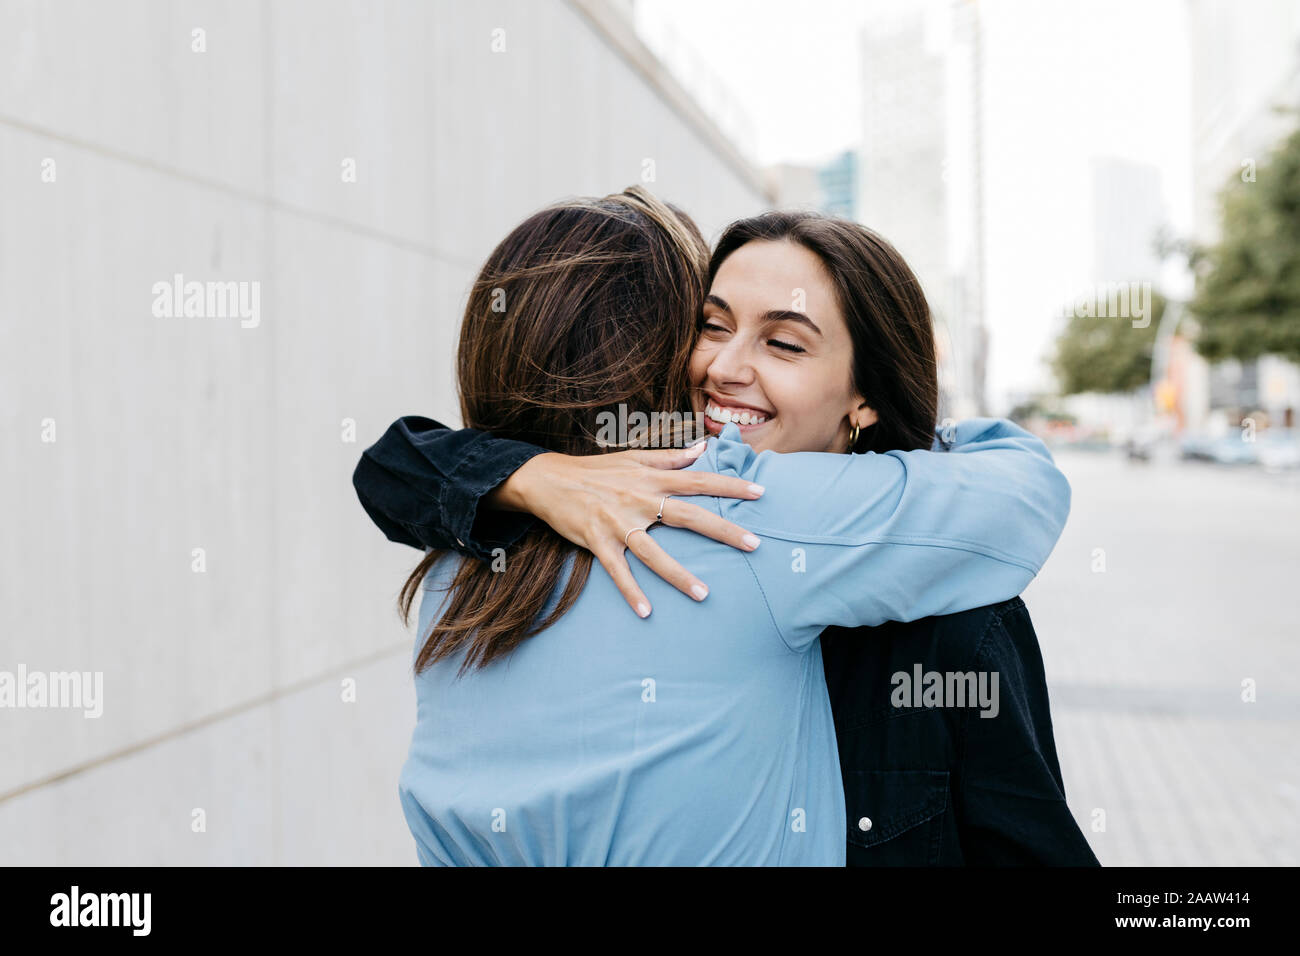 Two women hugging each other Stock Photo